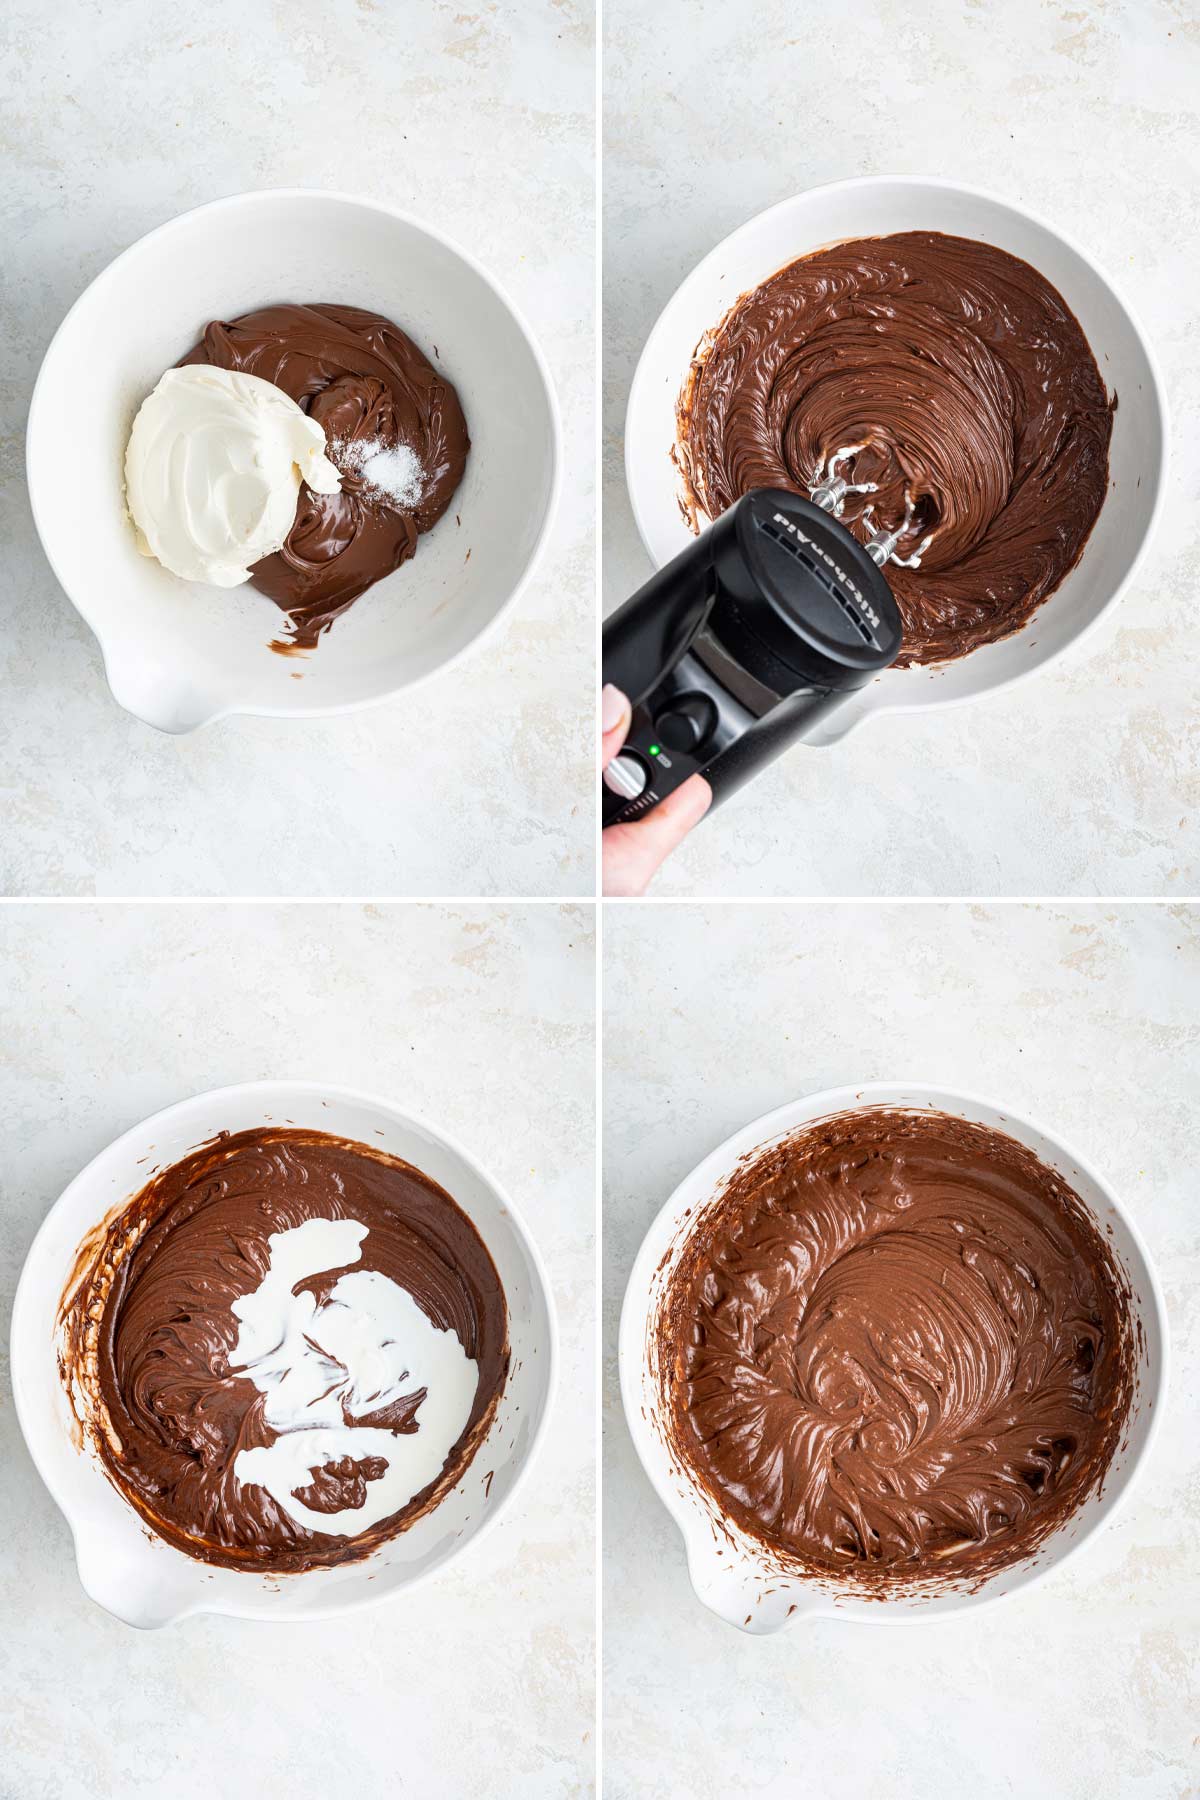 step by step photos showing the texture of the nutella filling as each ingredient is added